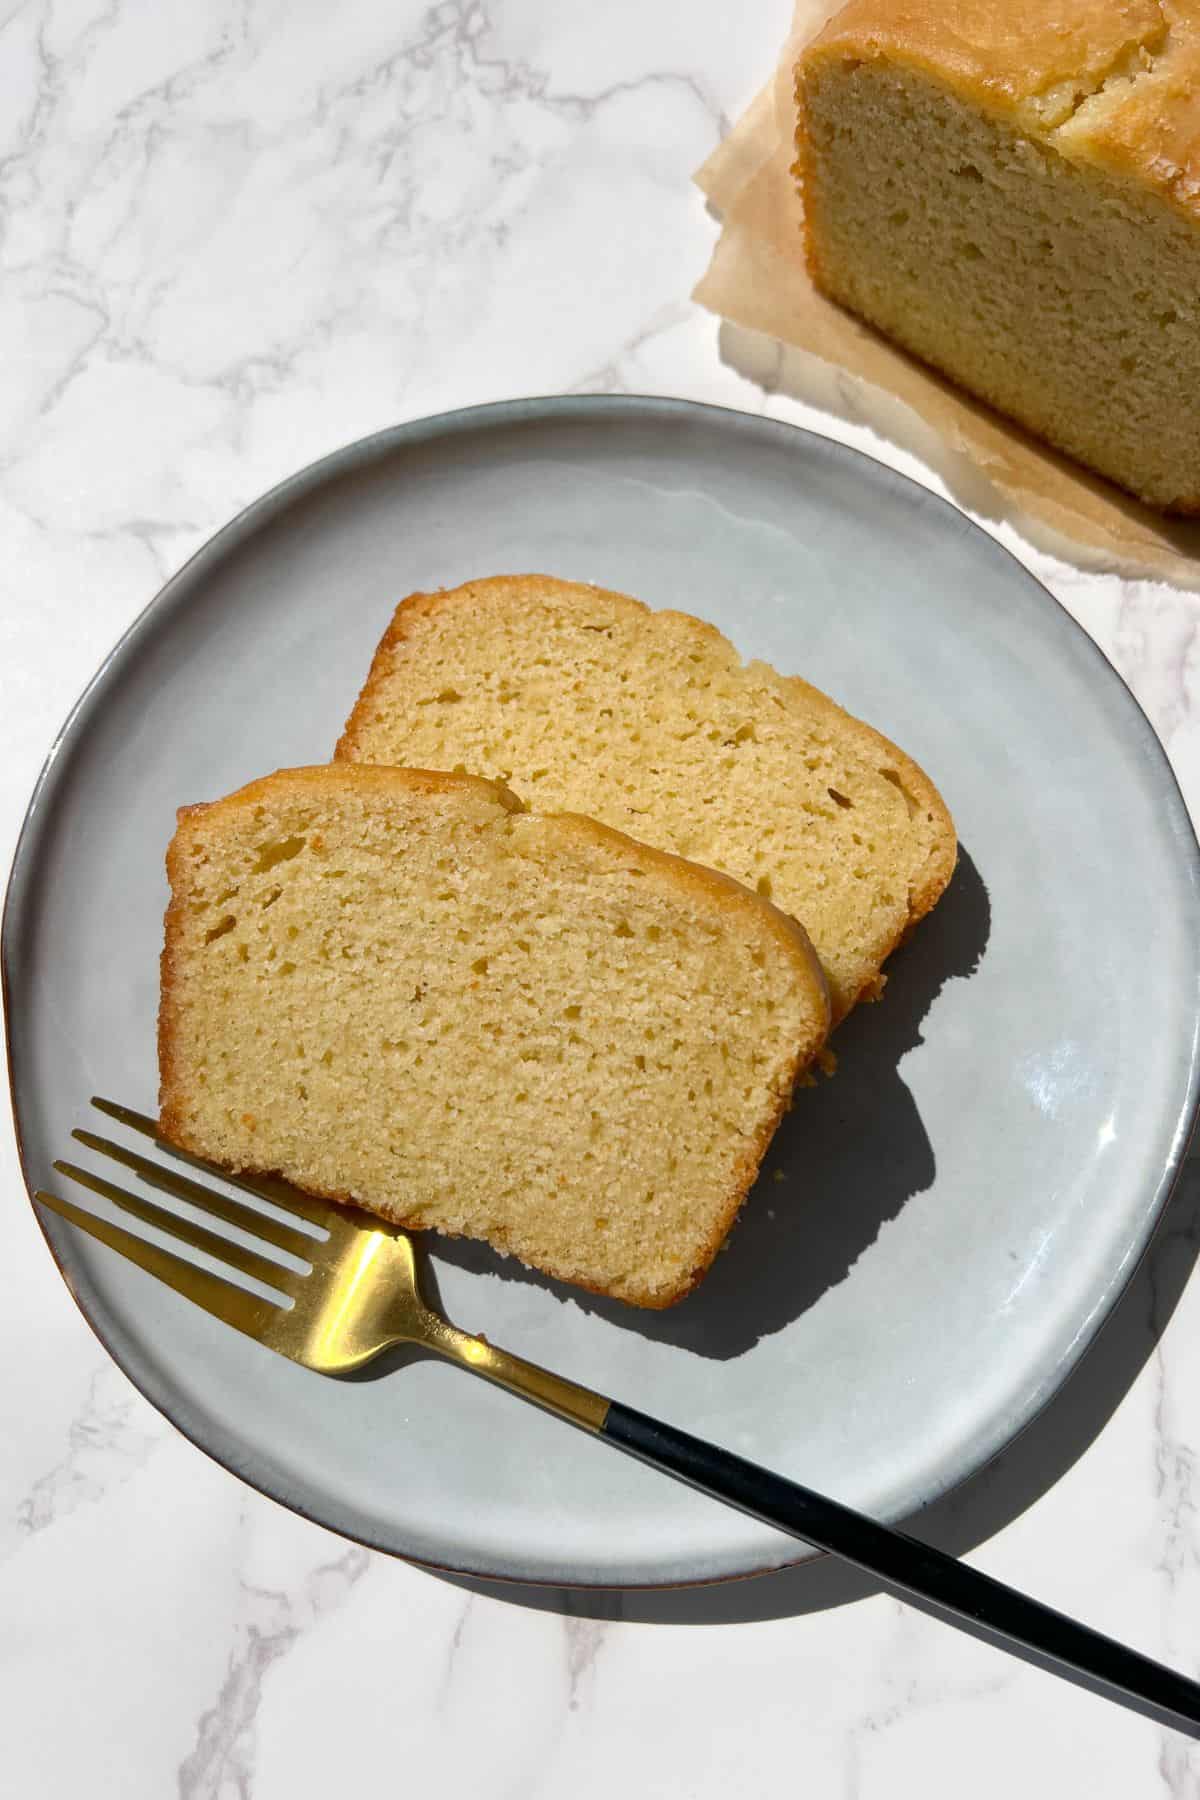 Slices of Starbucks Lemon Loaf on a plate with a fork.